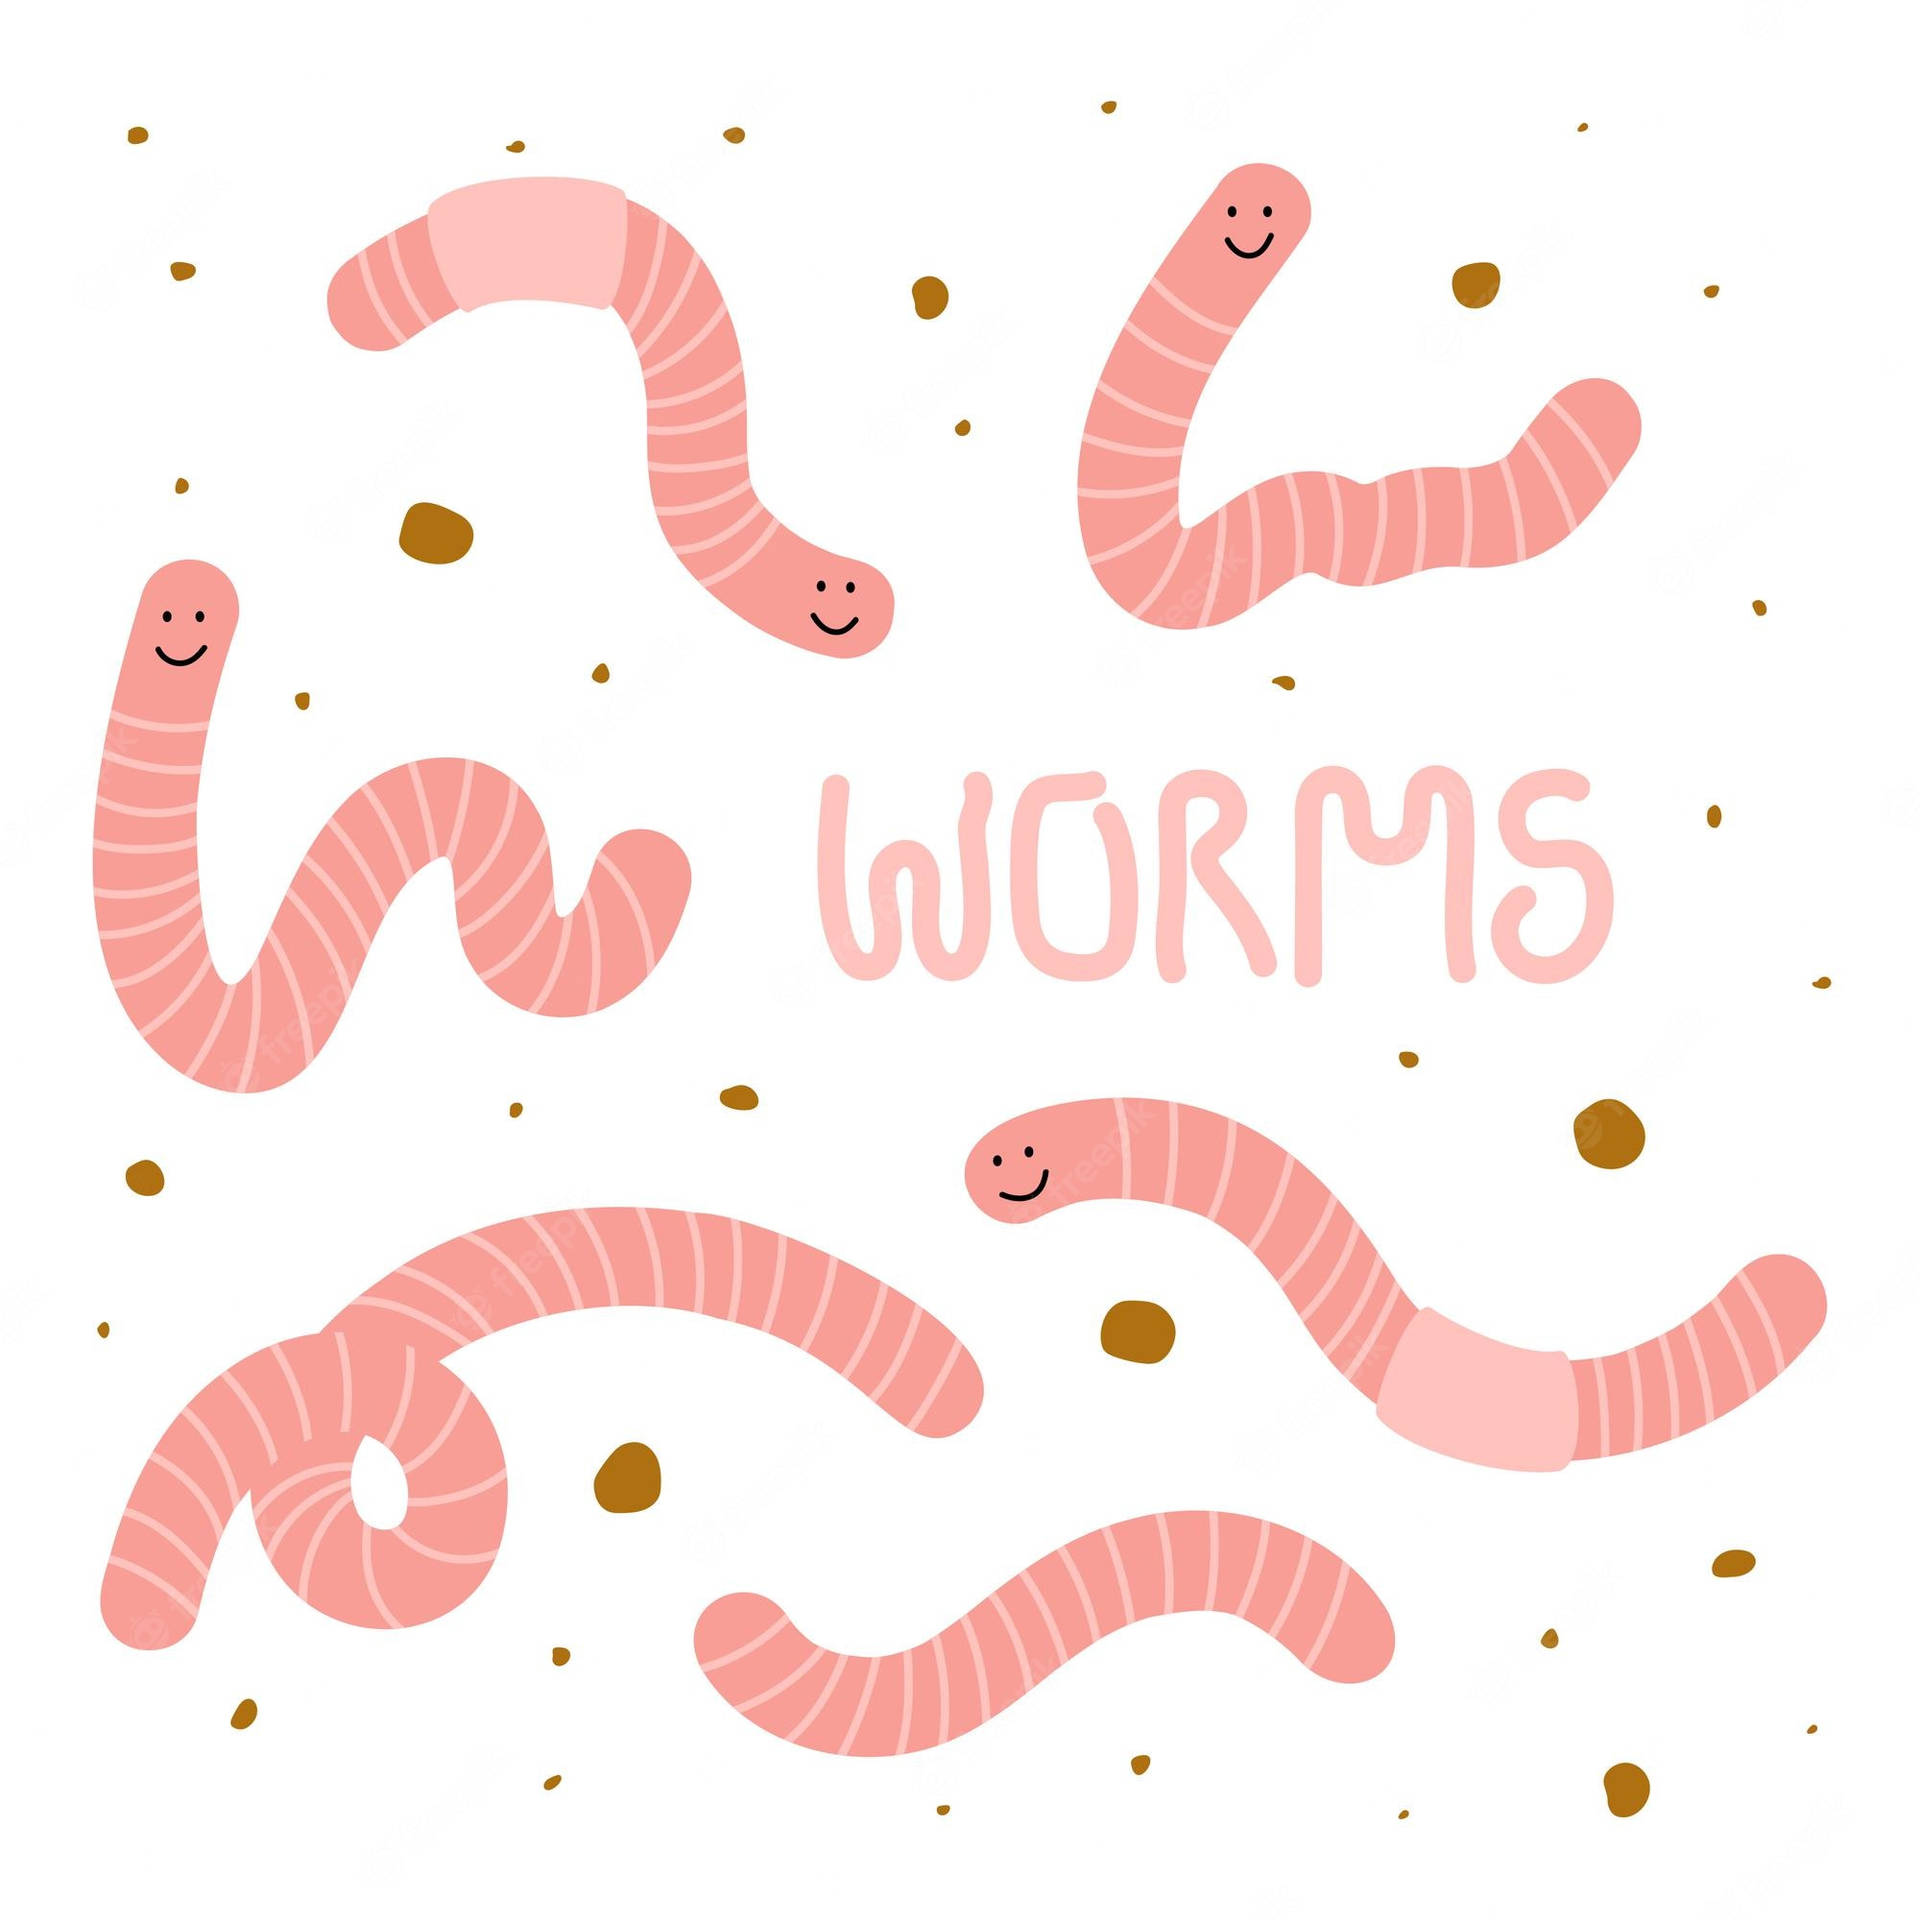 Pink And White Worm Illustration Wallpaper